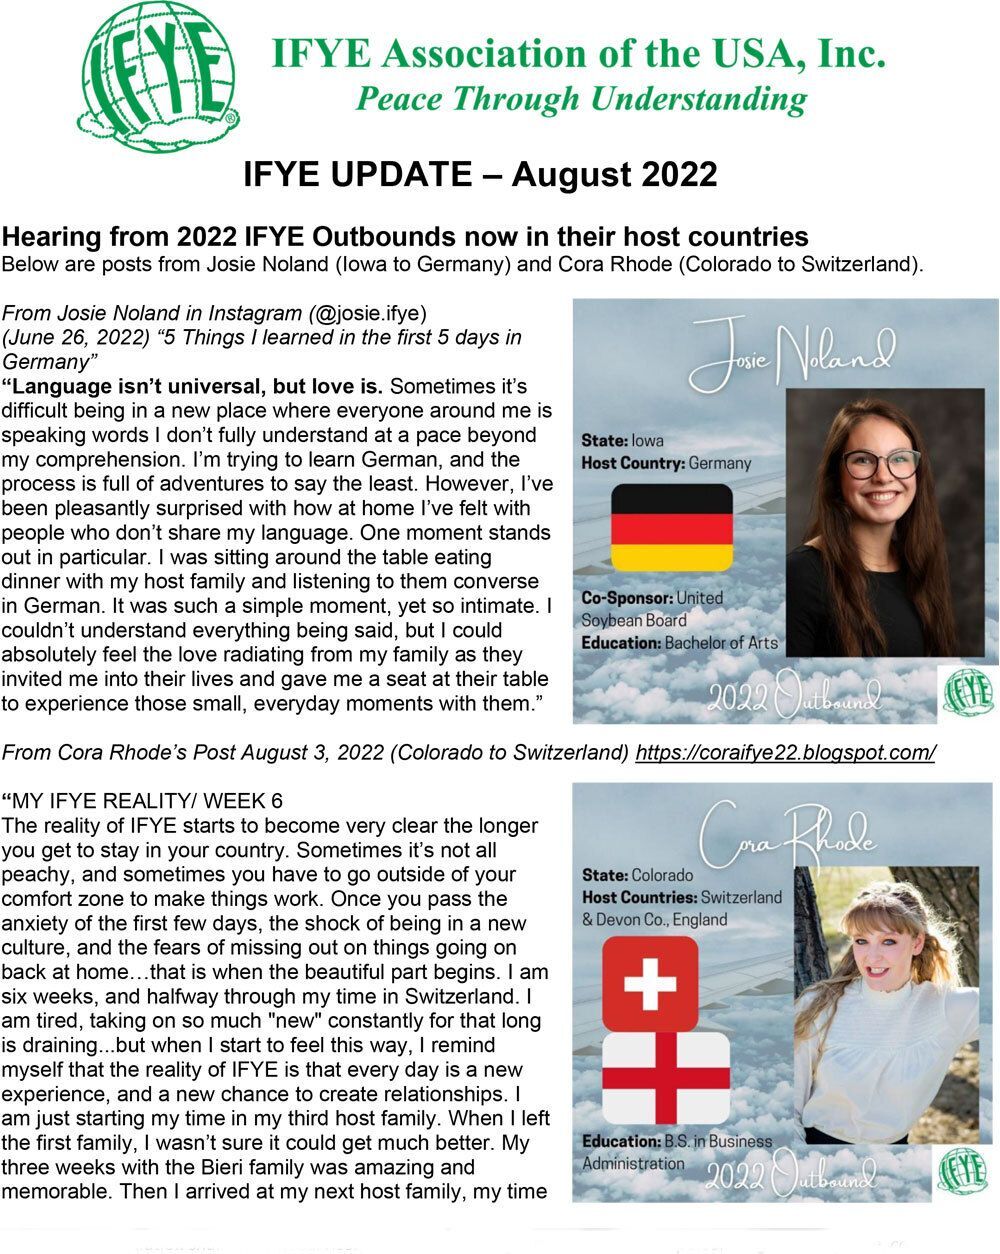 Read the August 2022 Update